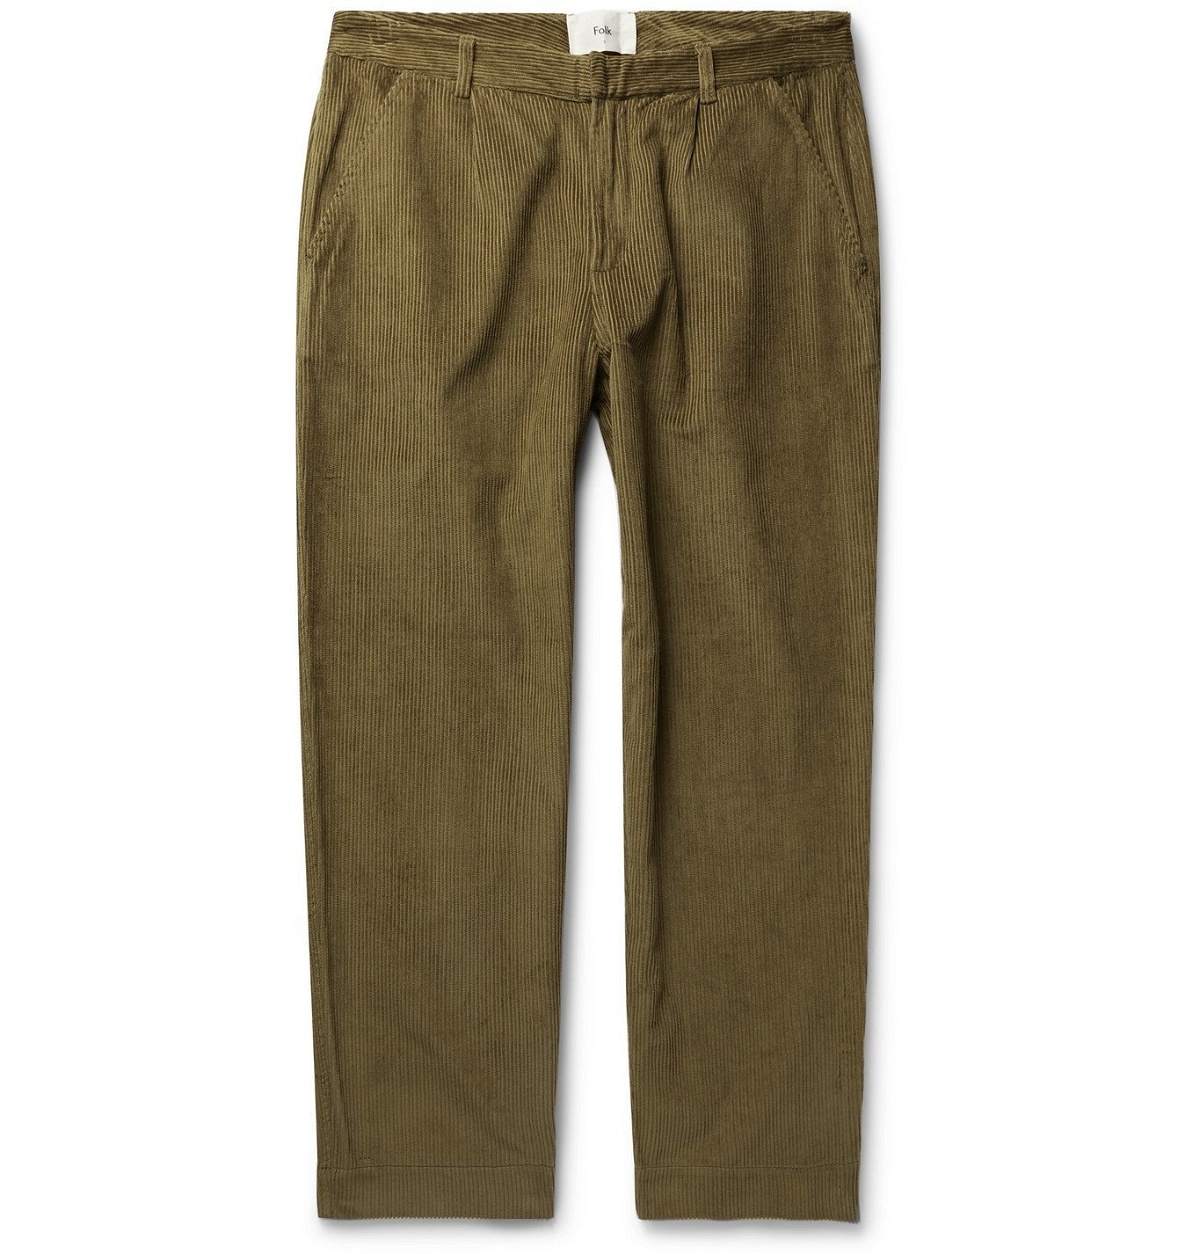 Share more than 140 corduroy tapered trousers best